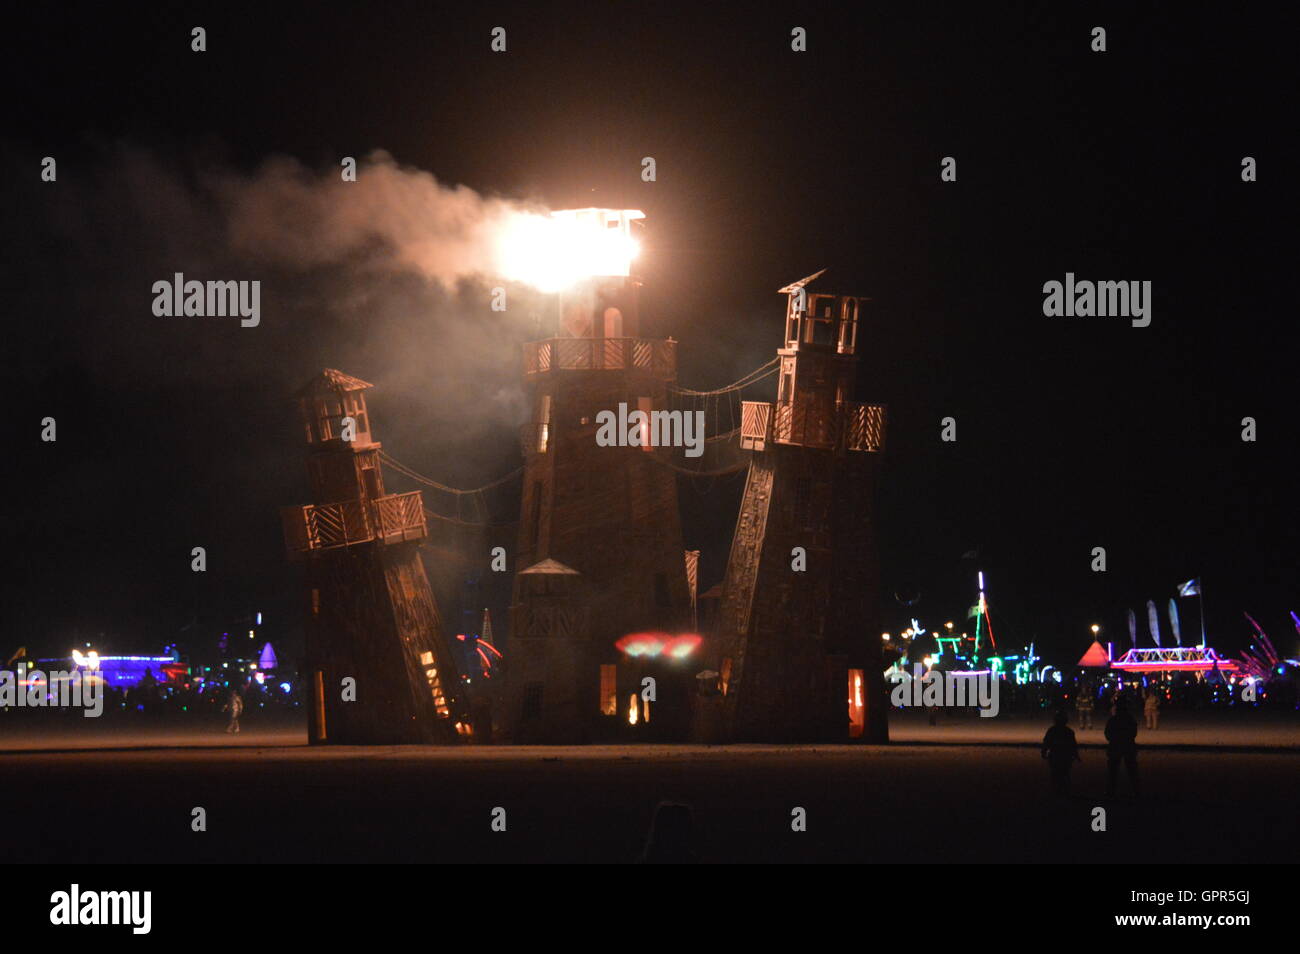 The Lighthouse art display is set fire during the final celebration at the annual desert festival Burning Man September 4, 2016 in Black Rock City, Nevada. Stock Photo